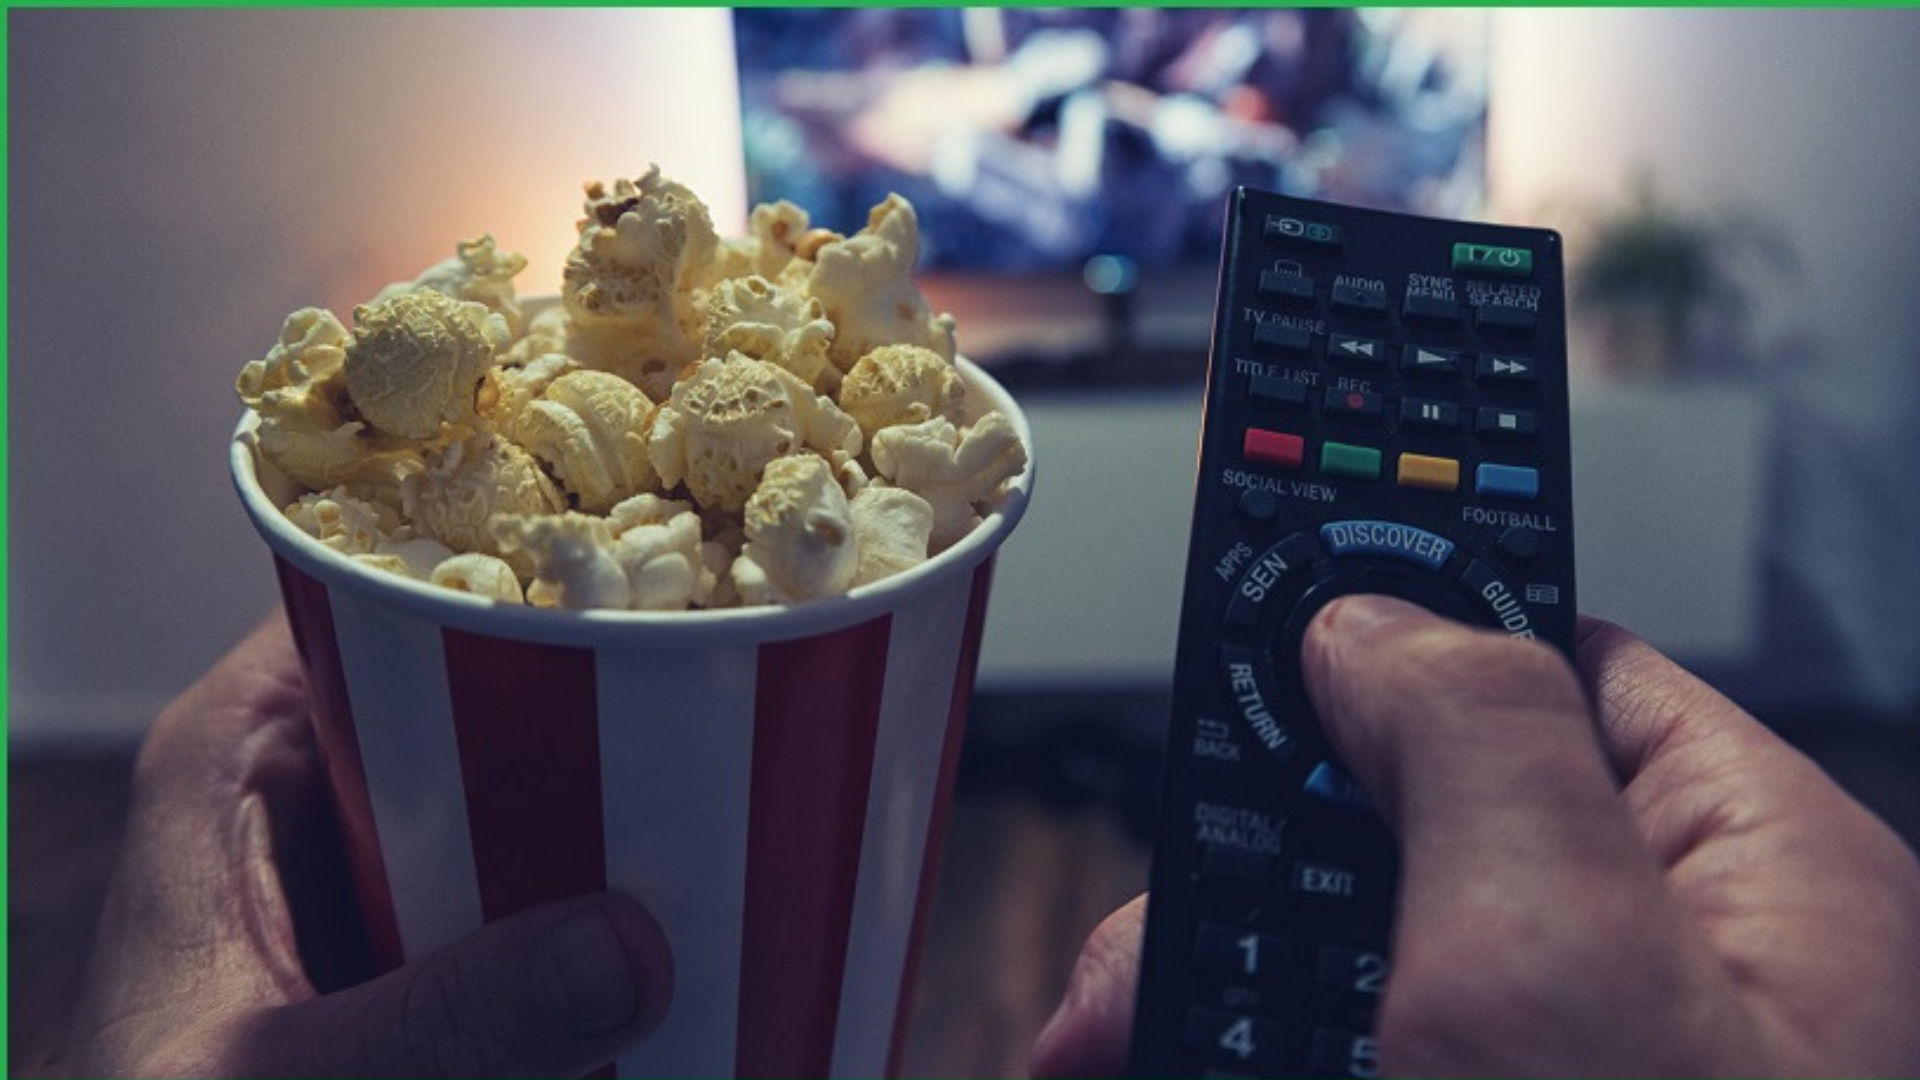 A man holding a remote control and popcorn while watching TV